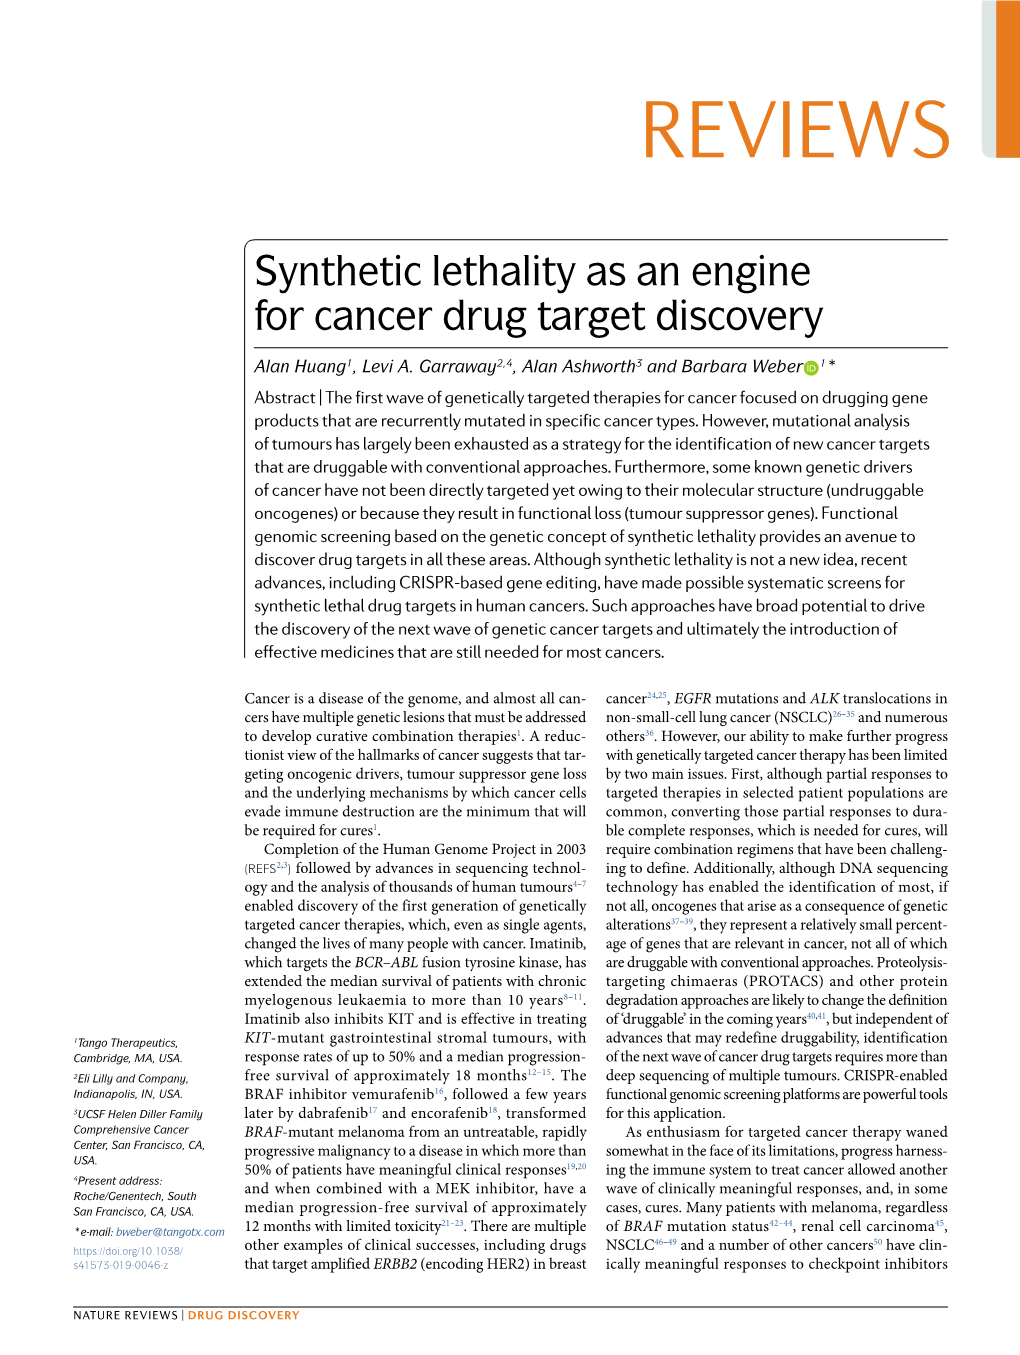 Synthetic Lethality As an Engine for Cancer Drug Target Discovery